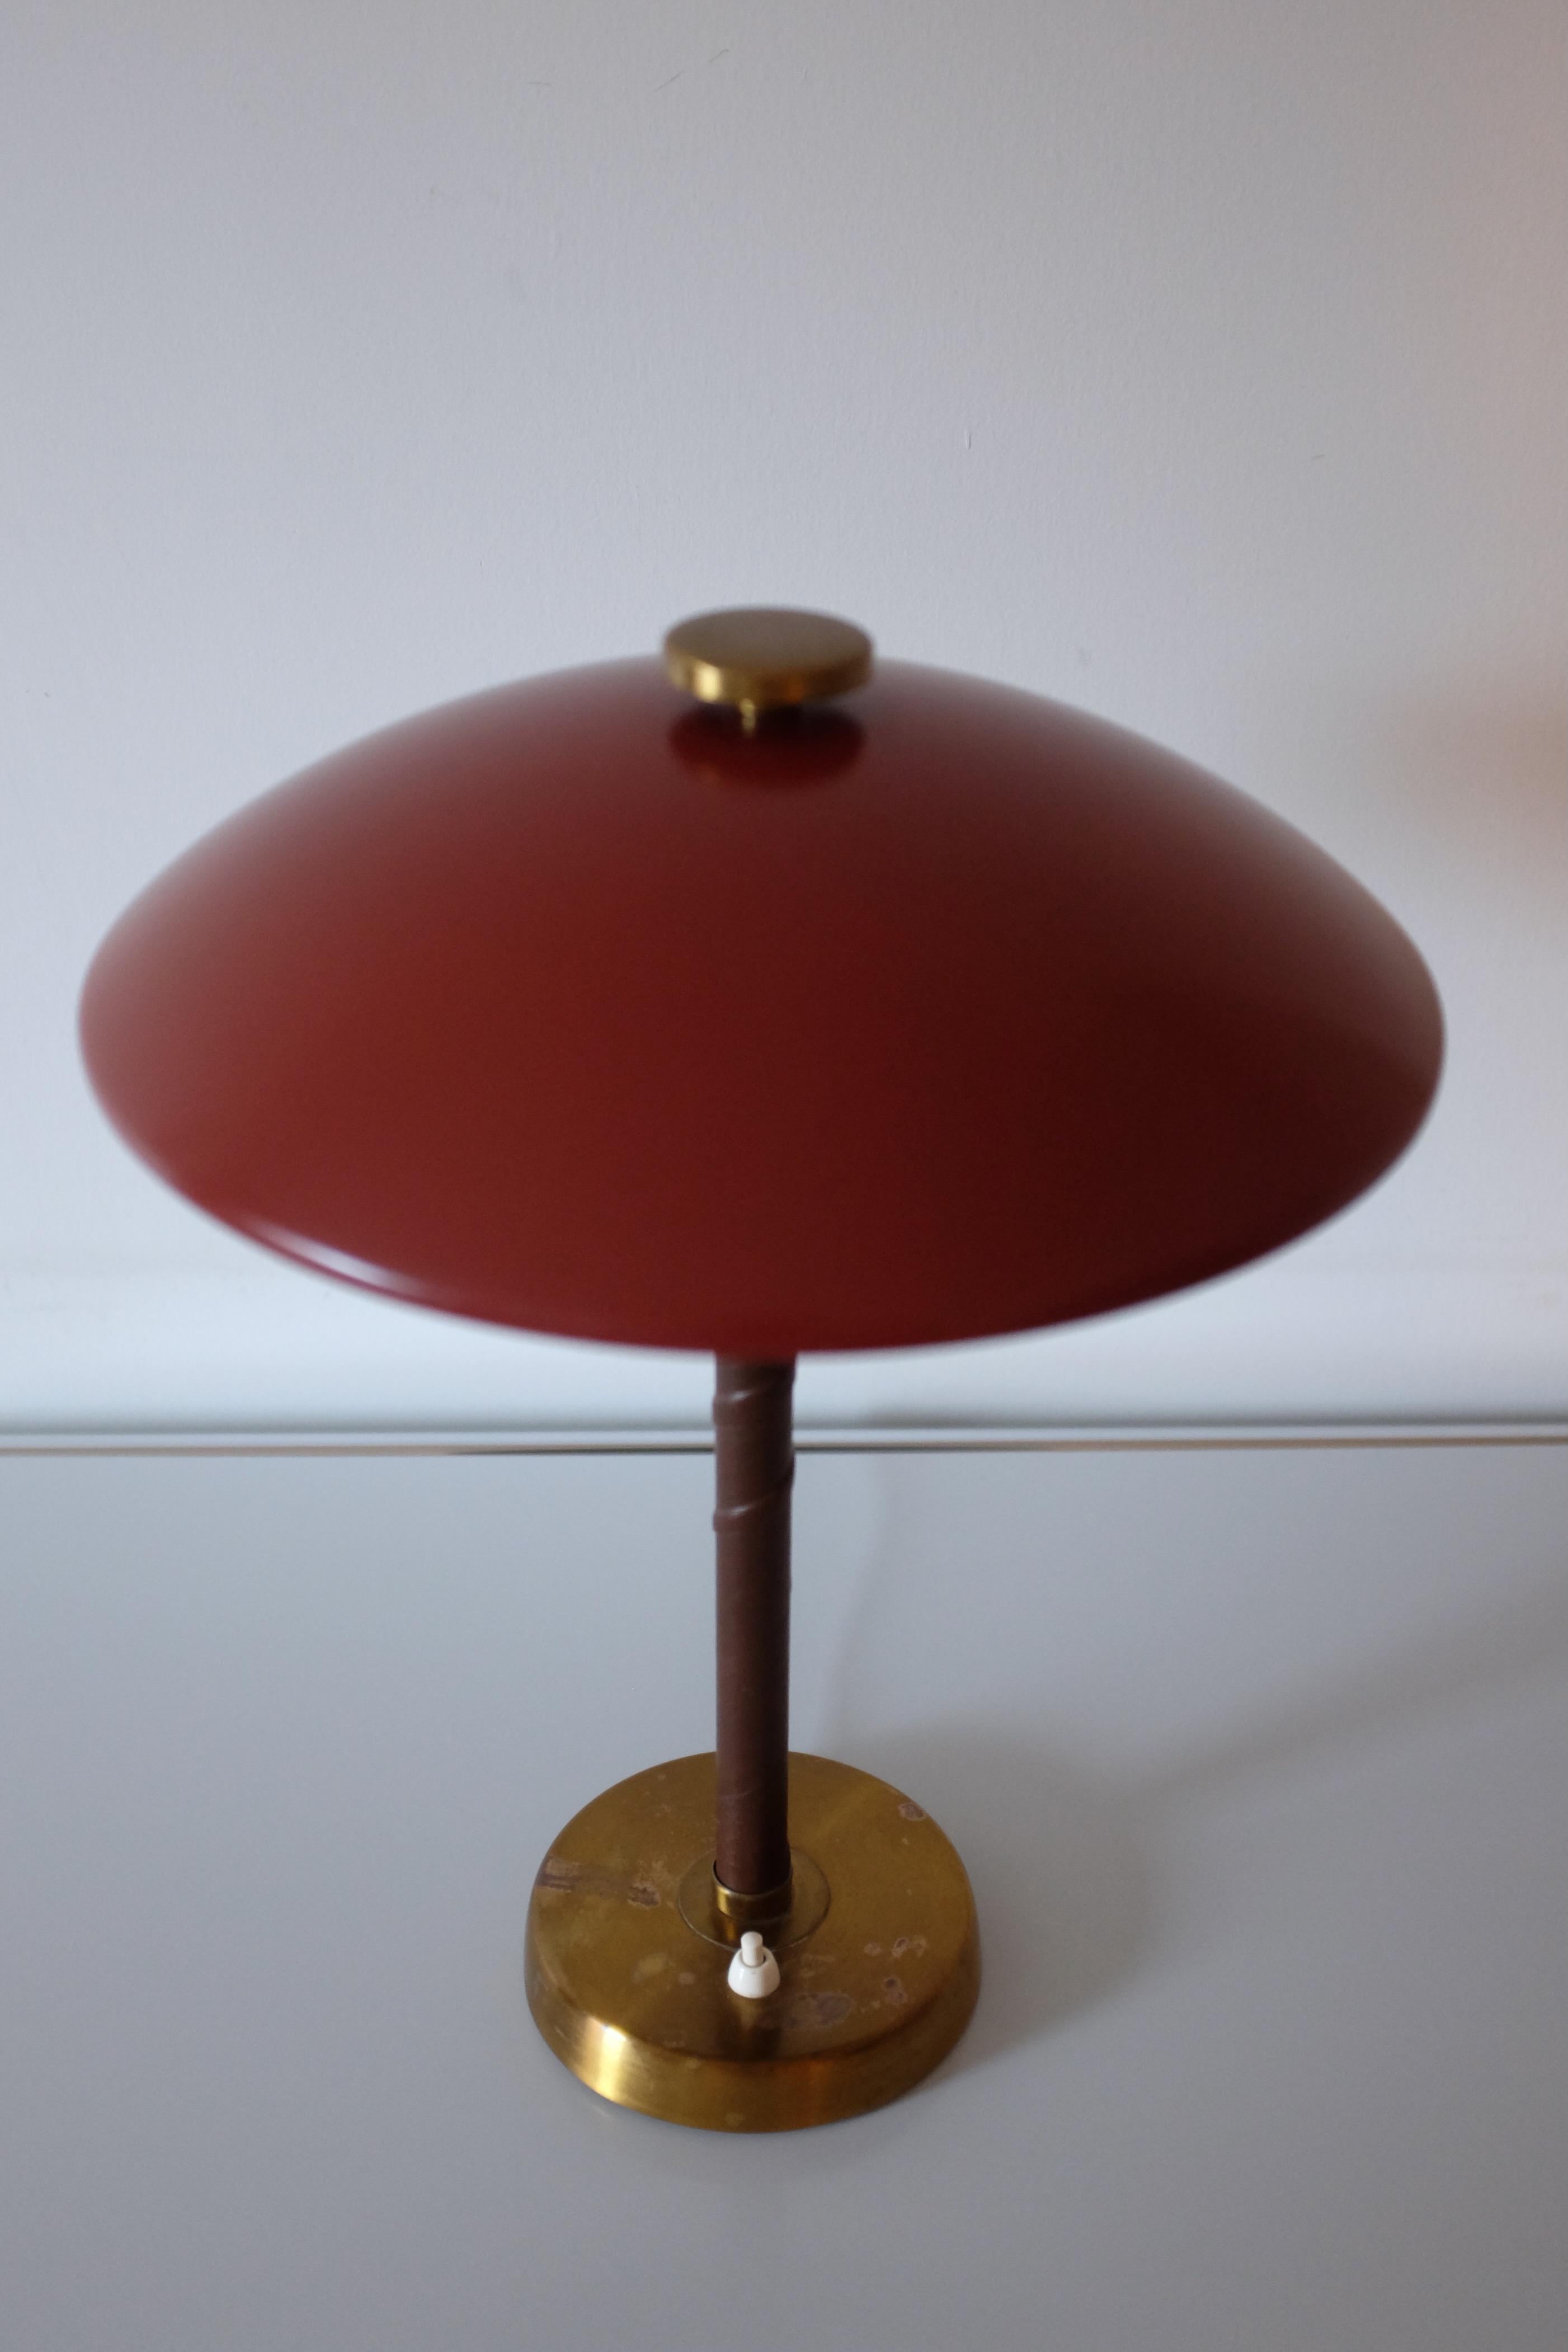 1940s Table lamp by Swedish lamp designer Einar Bäckström. Classic Swedish Modern design with a mix of brass, leather and painted metal shade. Einar Bäckström was a Swedish designer with his own studio in the south of Sweden city of Malmö that he